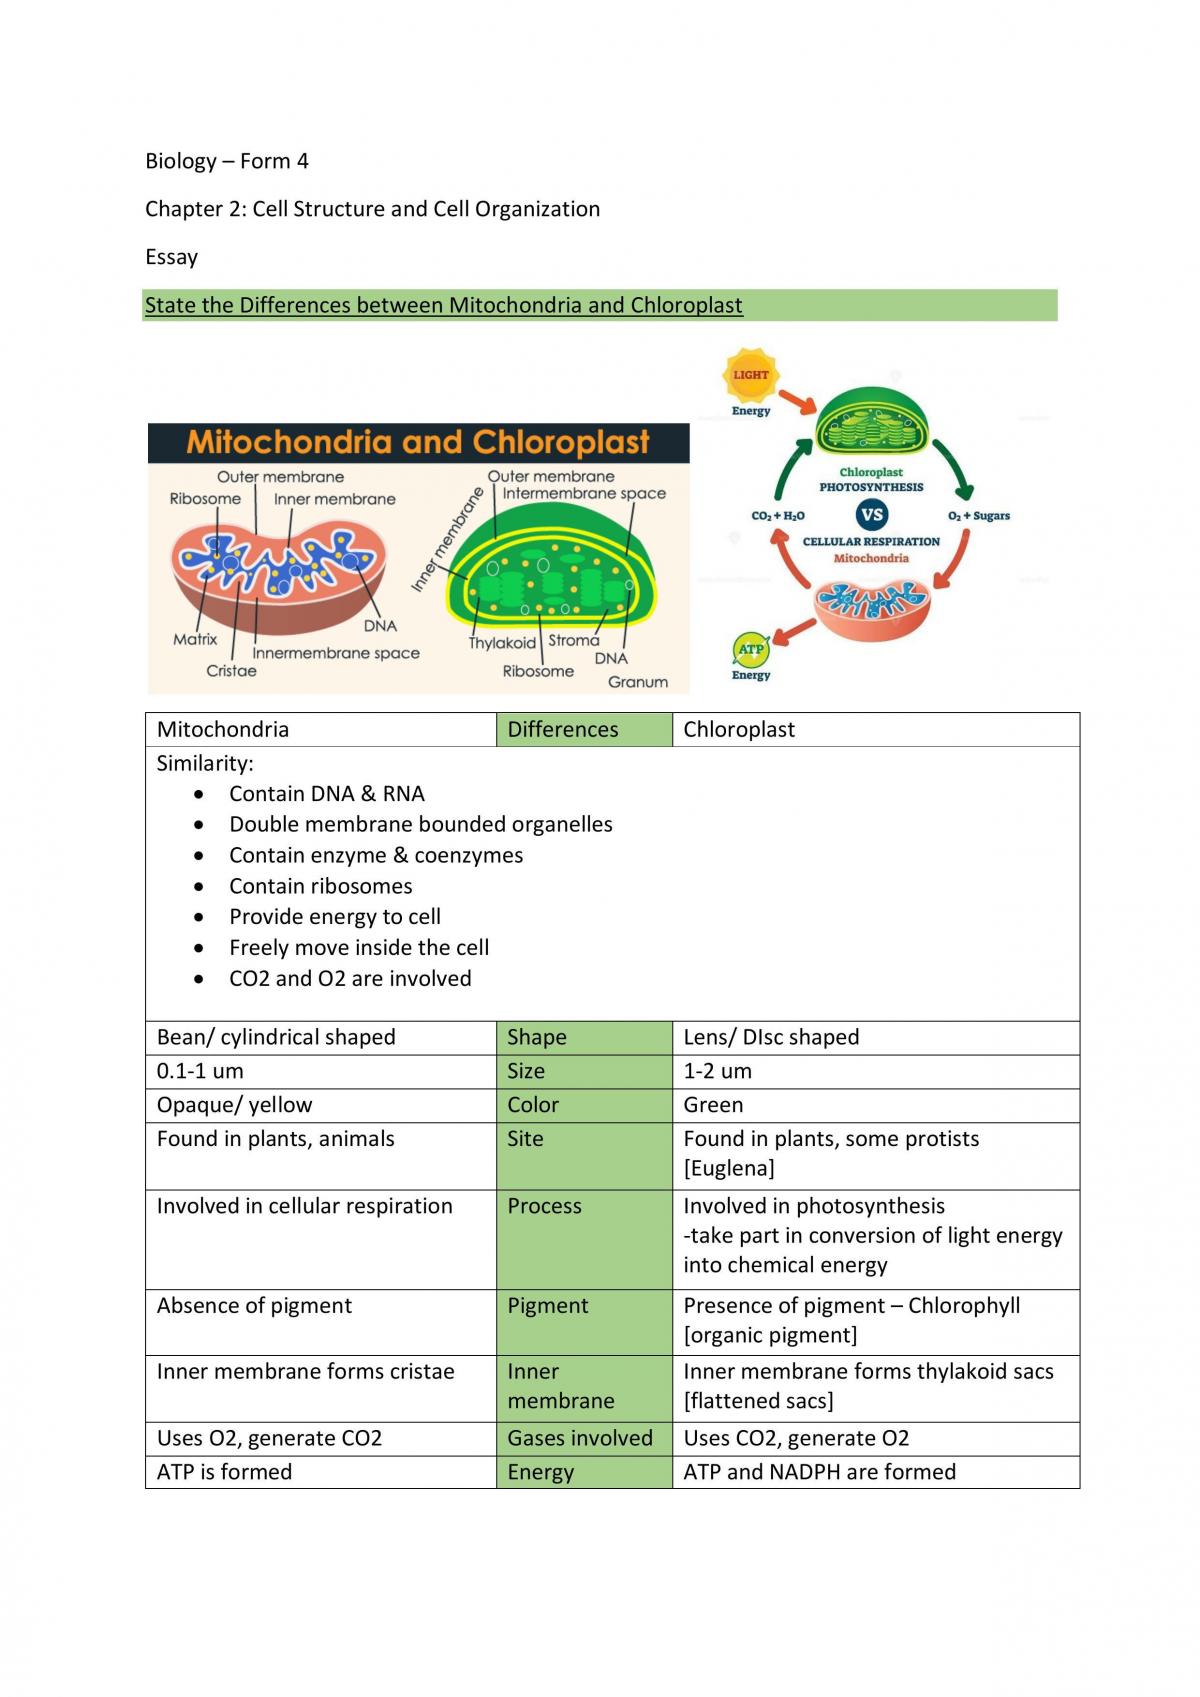 biology essay questions and answers spm